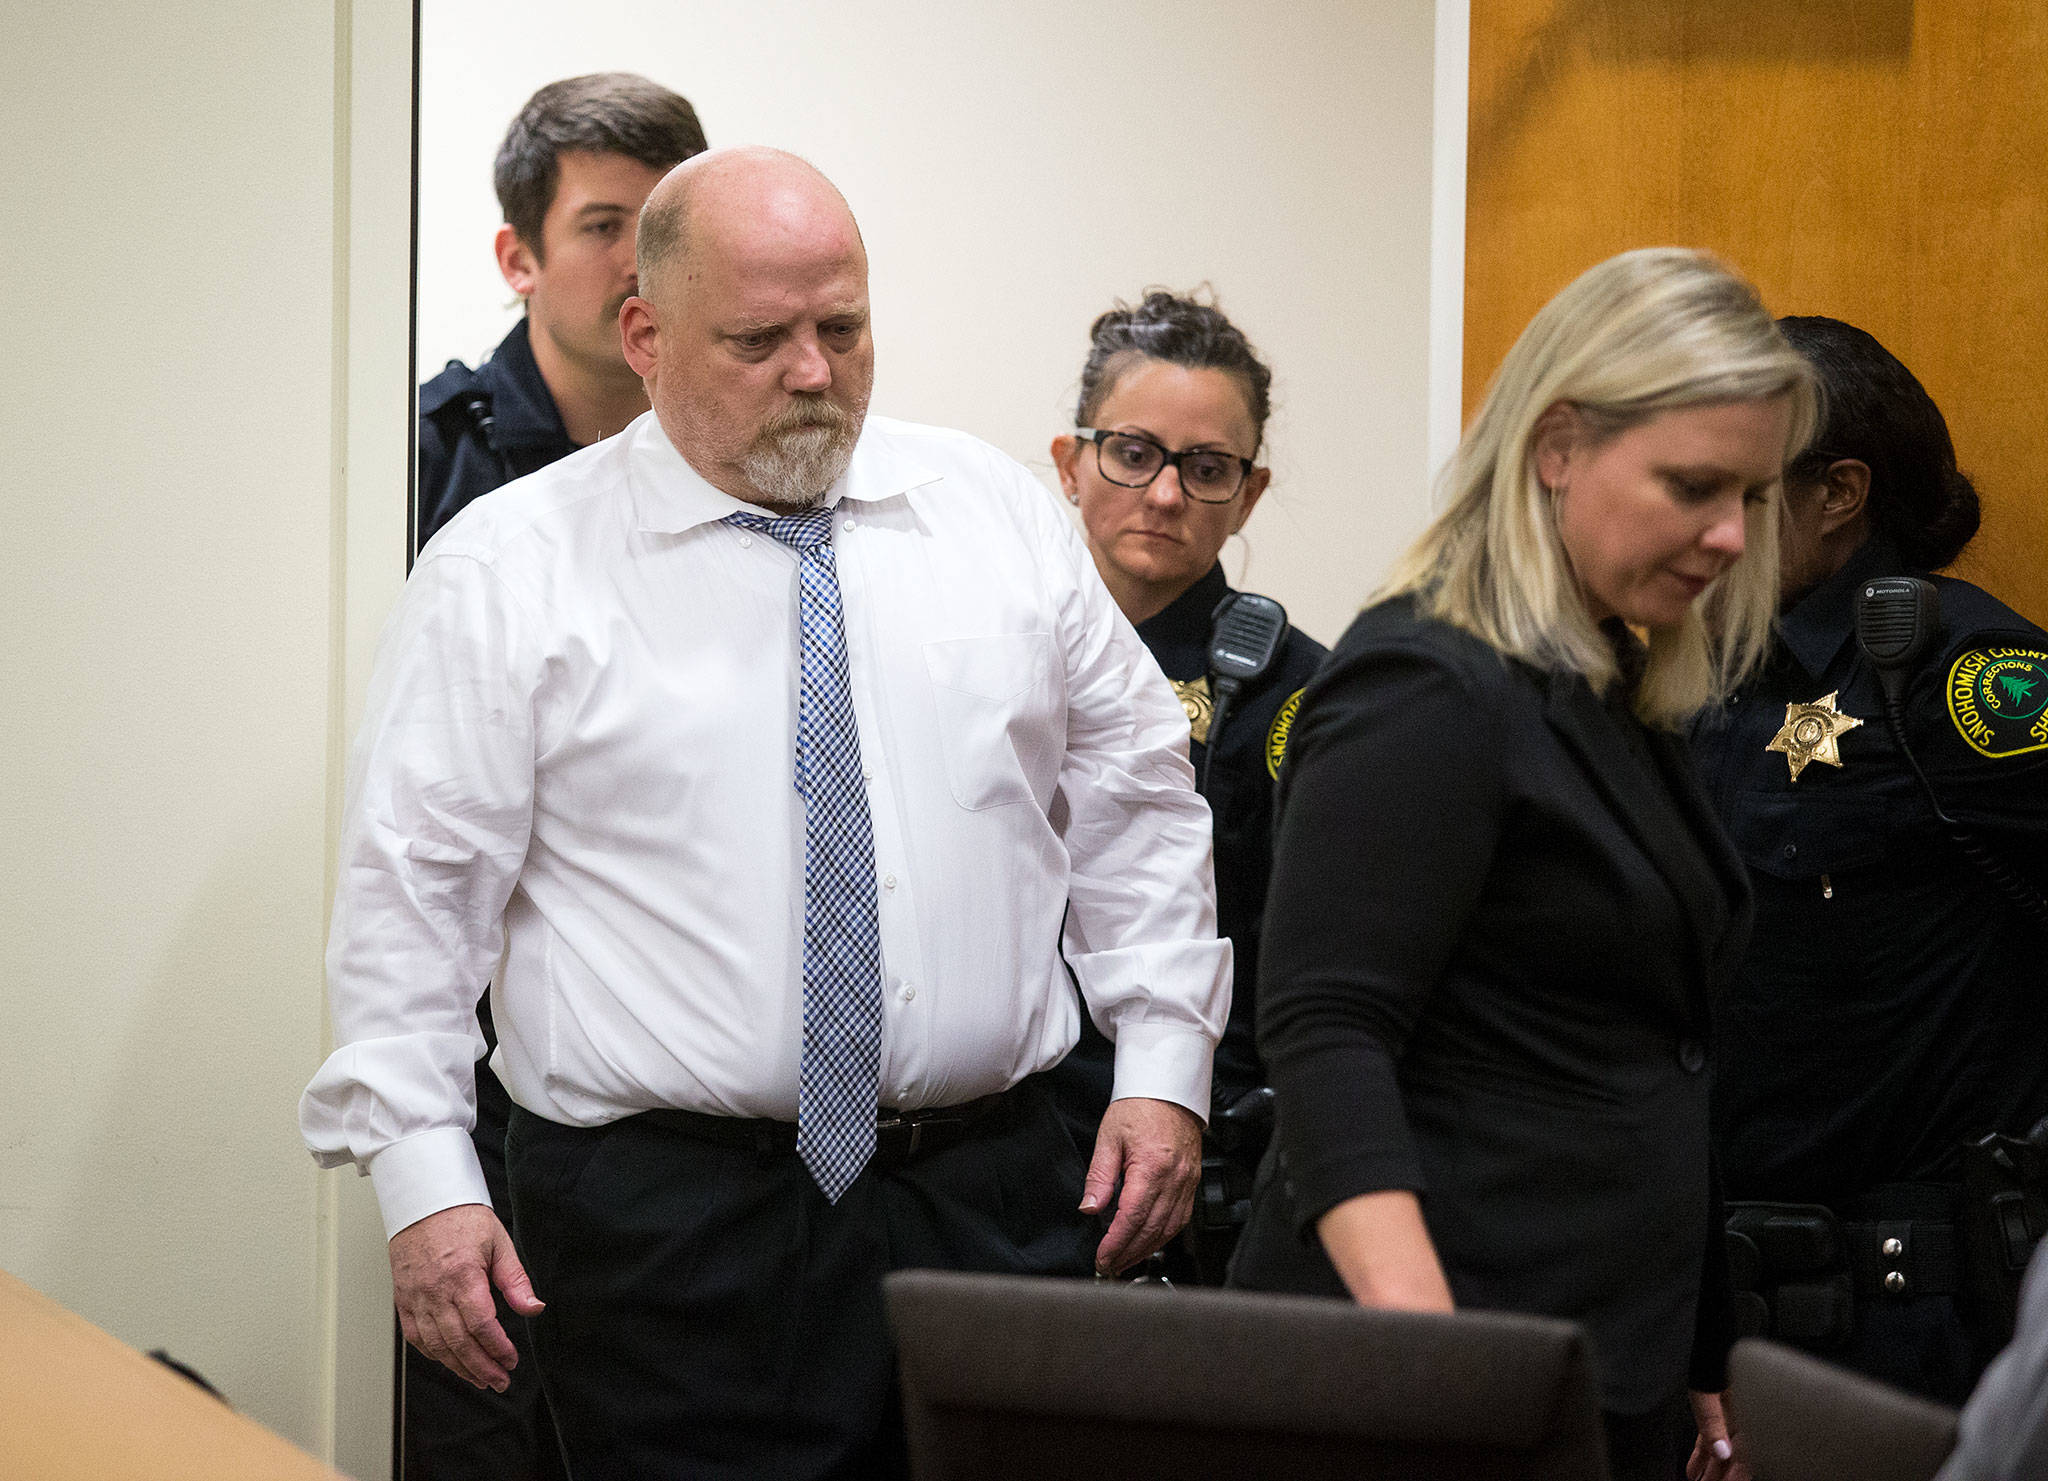 William Earl Talbott II (left), with defense attorney Rachel Forde (right), enters a courtroom for his arraignment June 19 in Everett. (Andy Bronson / The Herald)